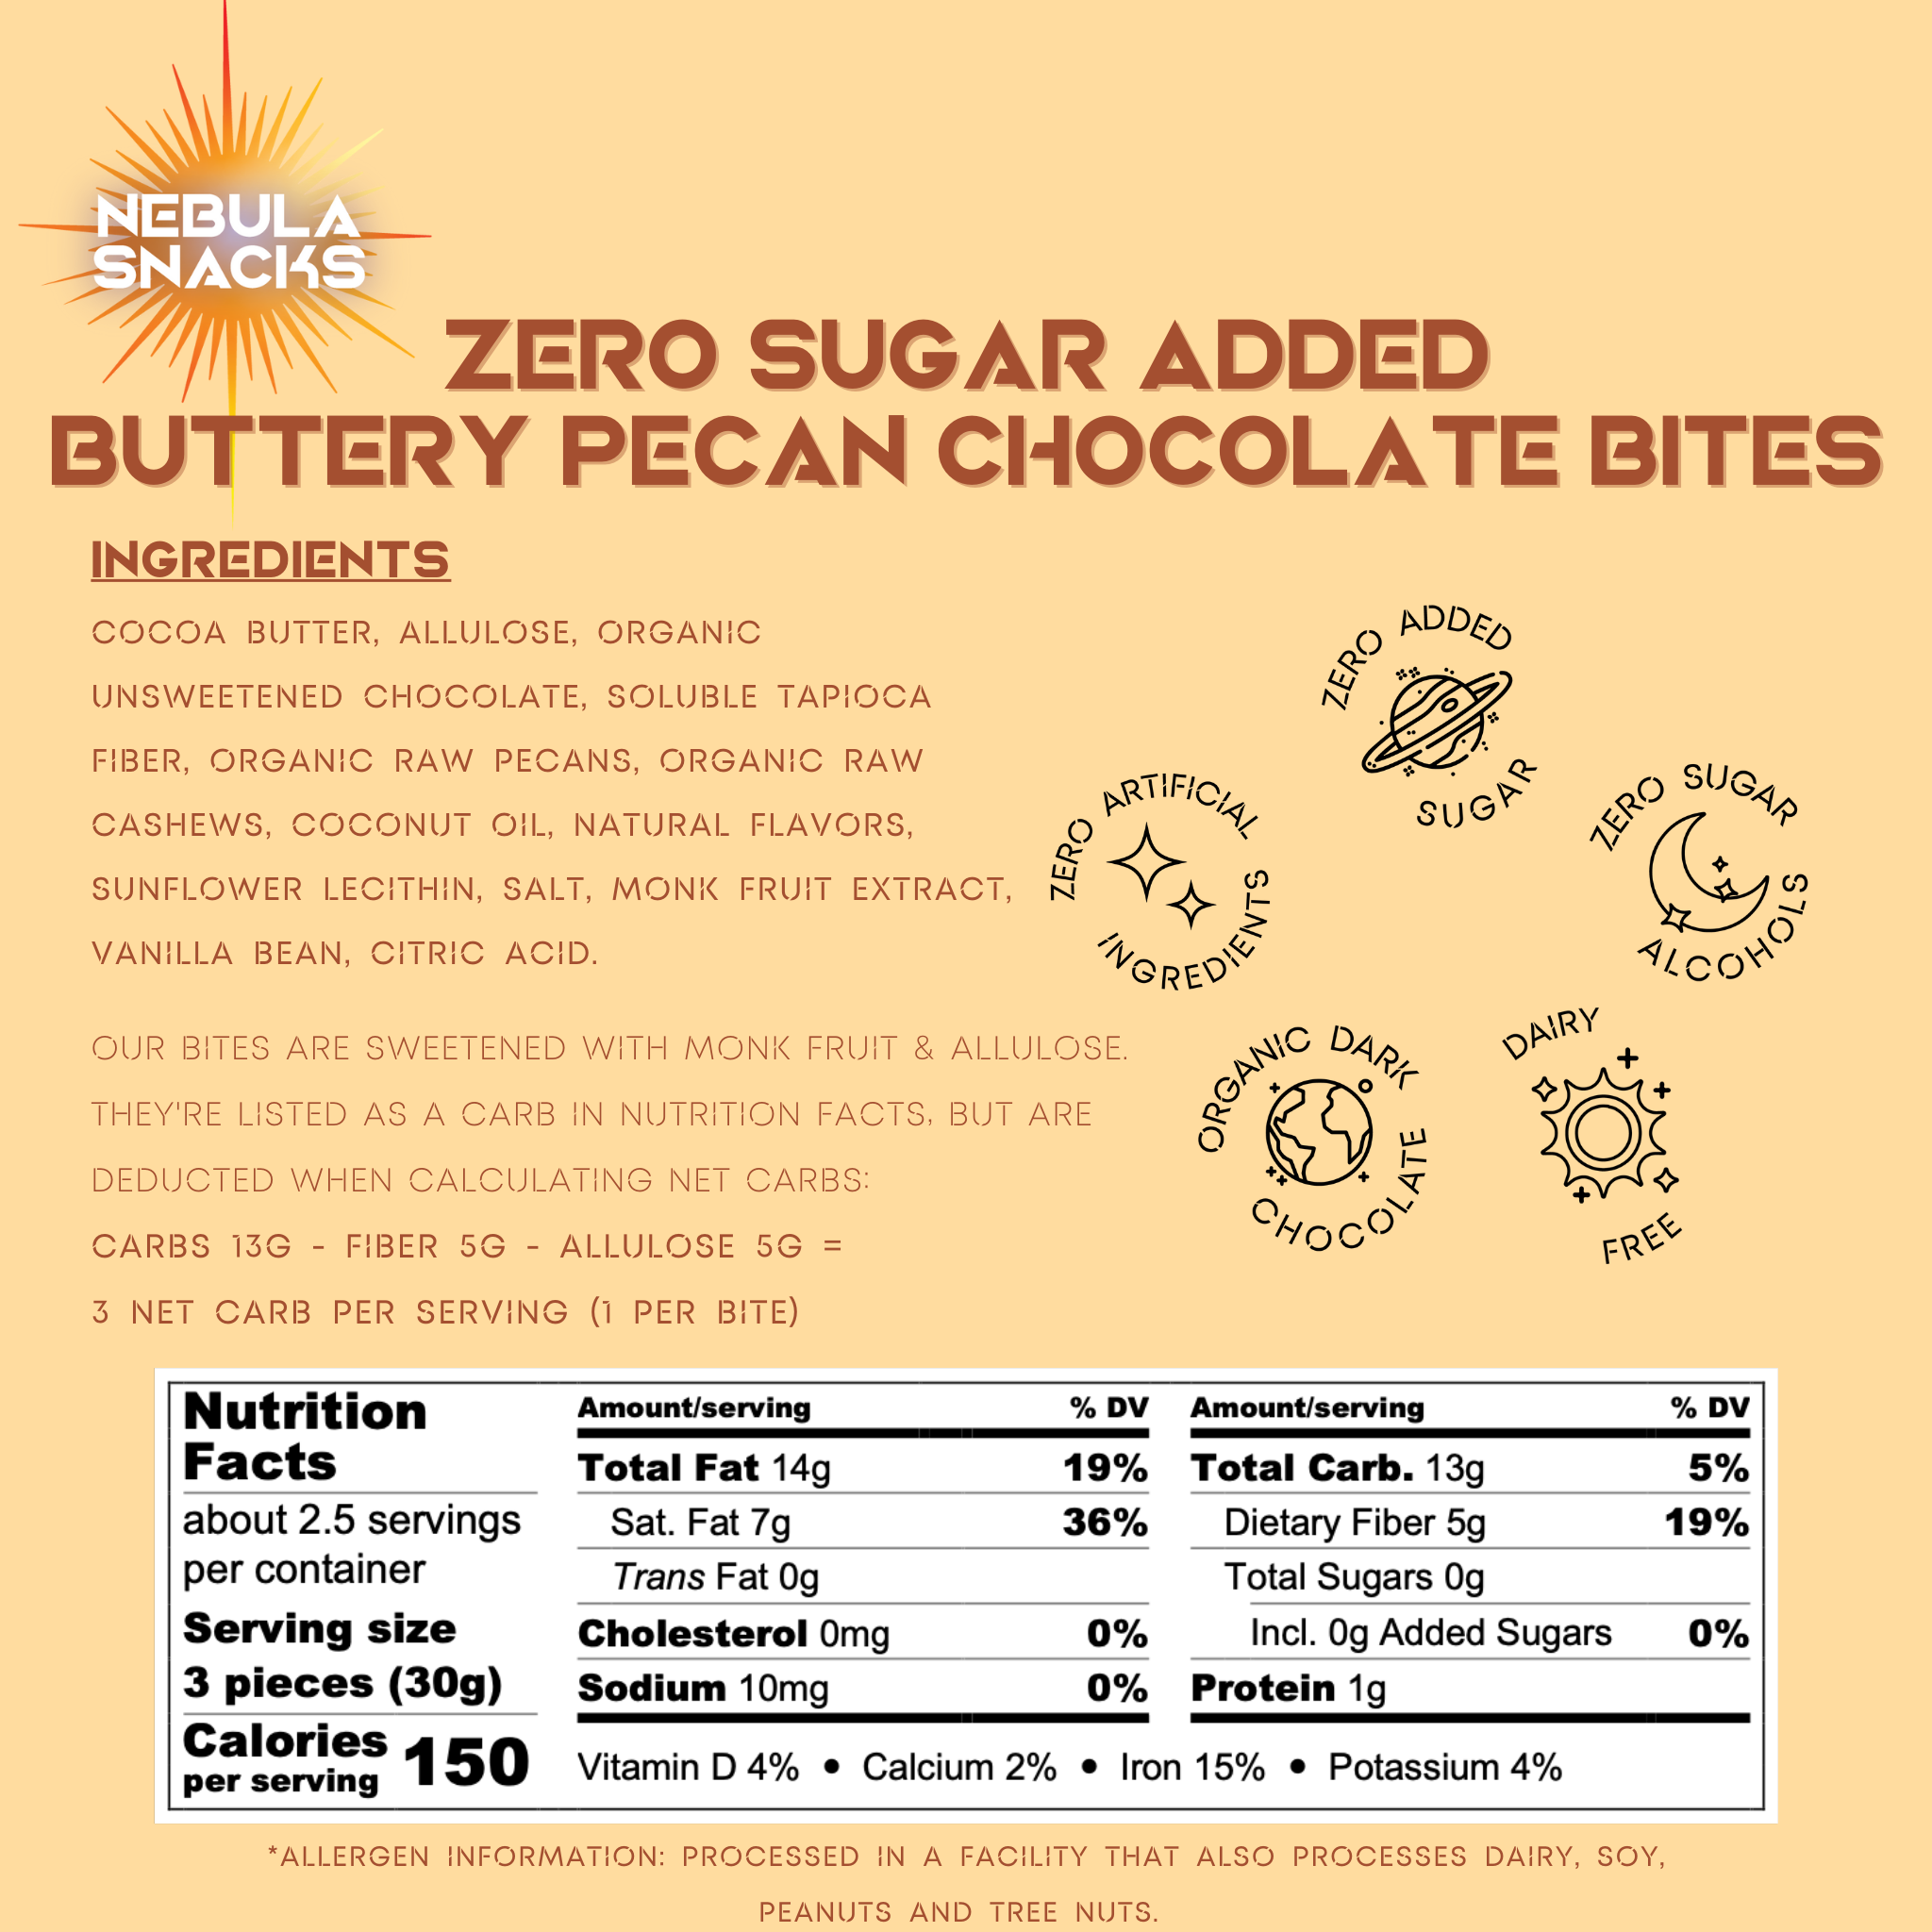 Nebula Snacks - Zero Sugar Added Buttery Pecan Chocolate Bites - Nutrition Facts &amp; Ingredients